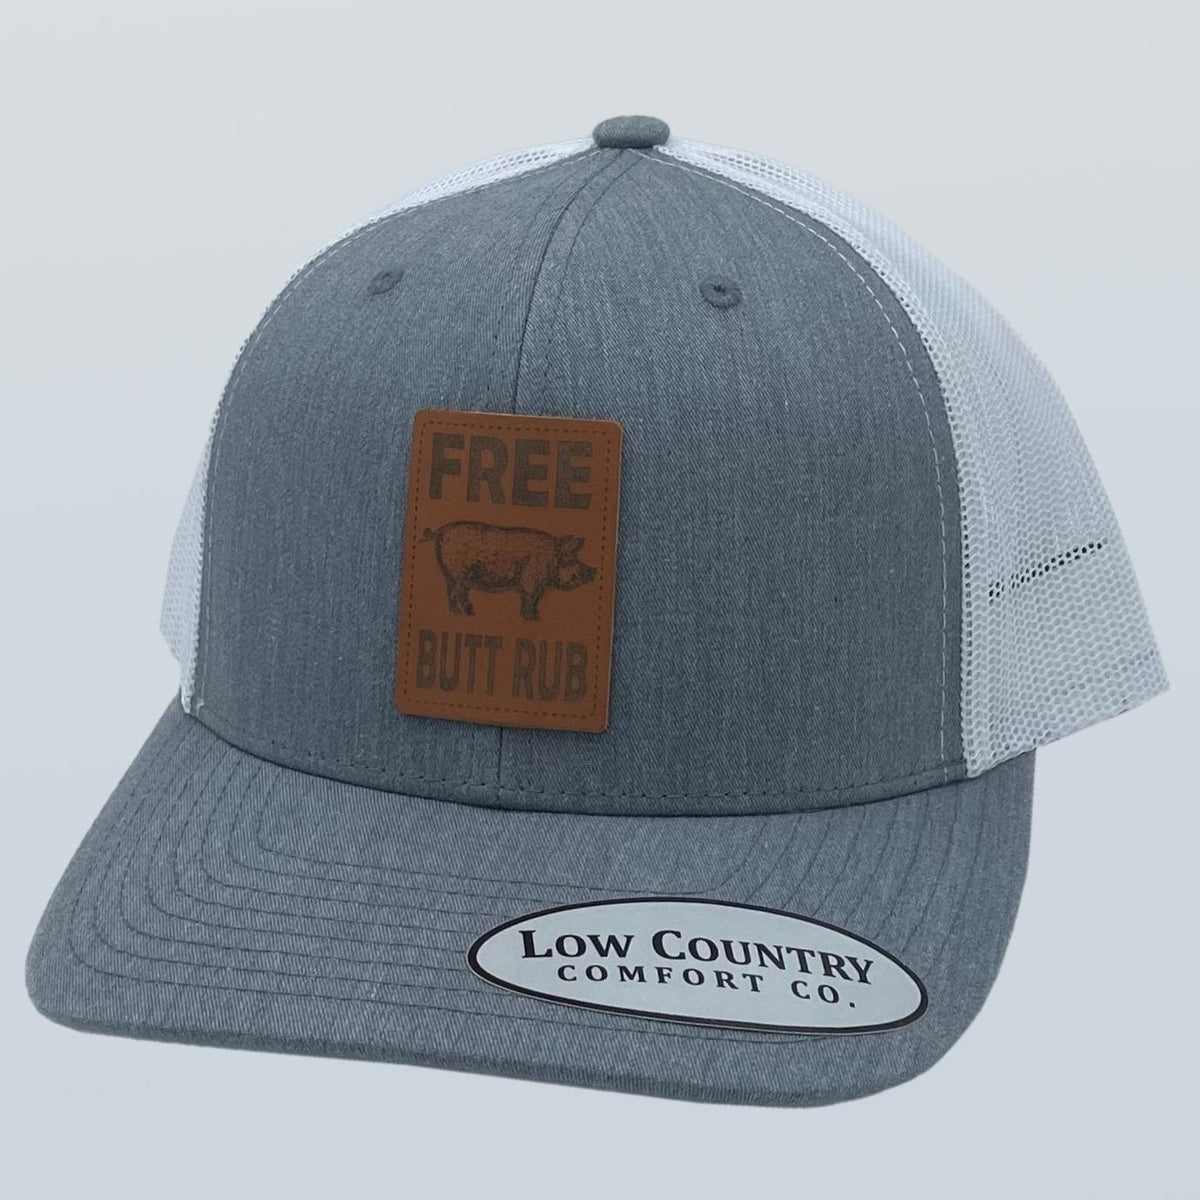 Free Butt Rub Pig Patch Heather/White Hat – Riverbed Threads